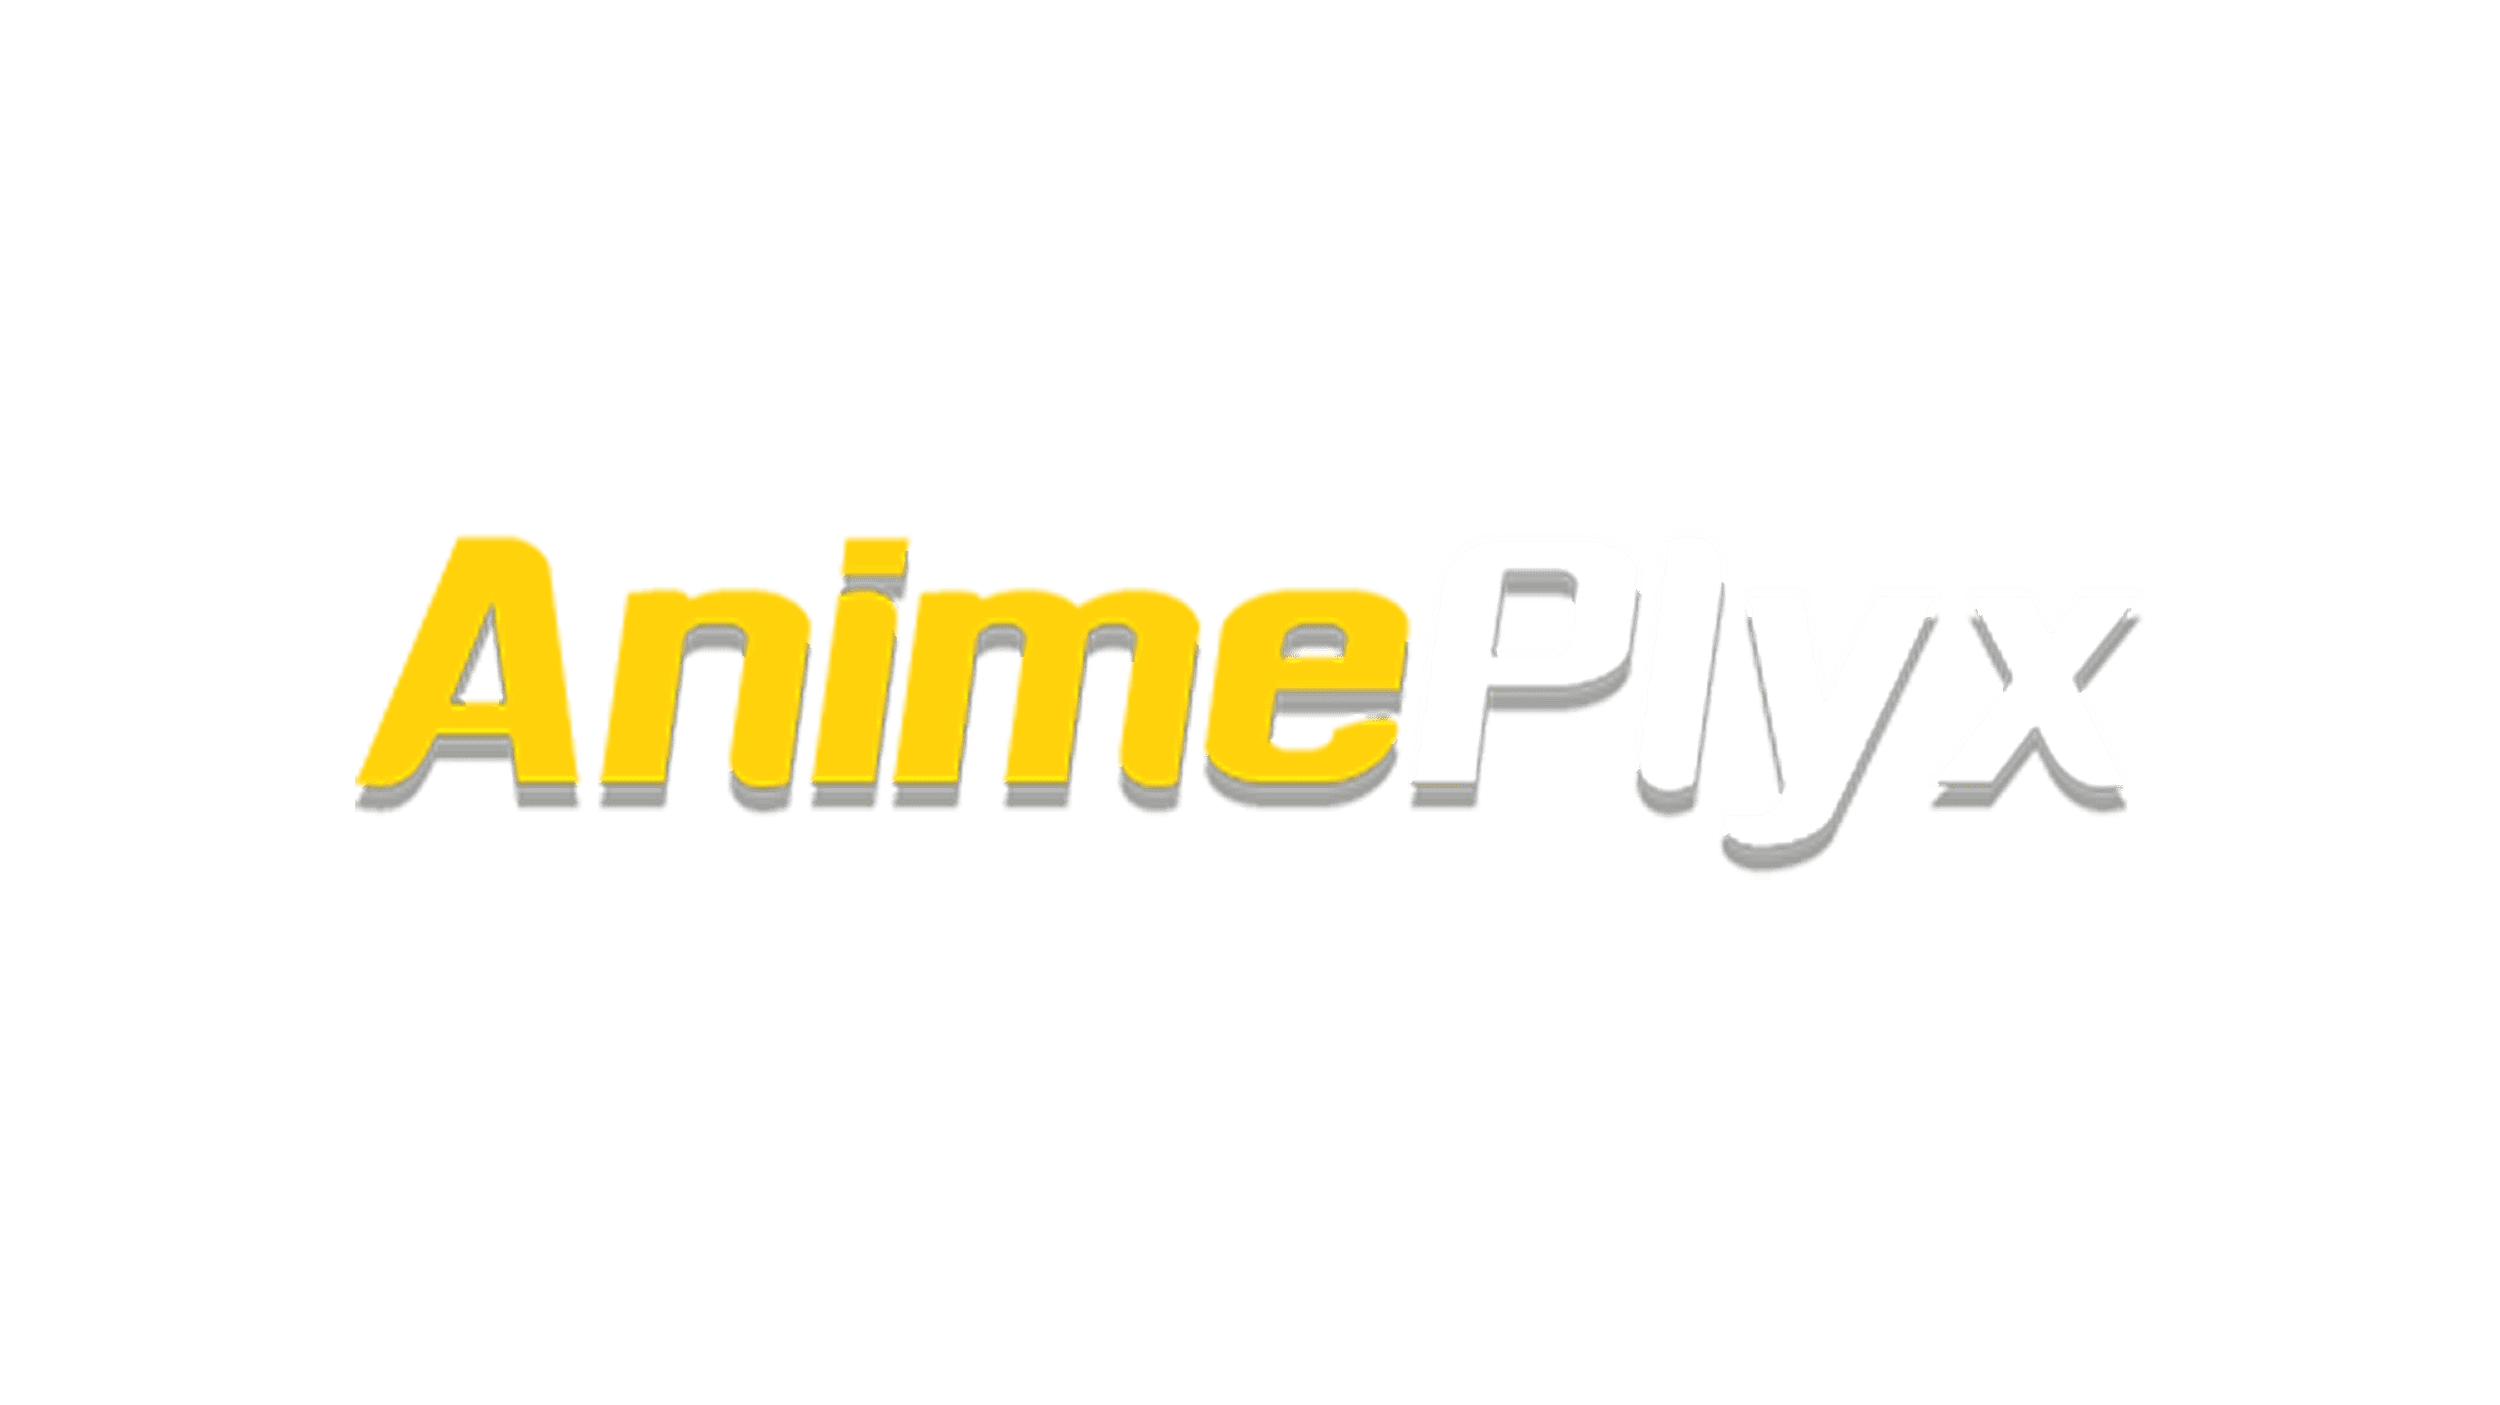 AnimePlyx - Watch The Latest Anime Movies Here